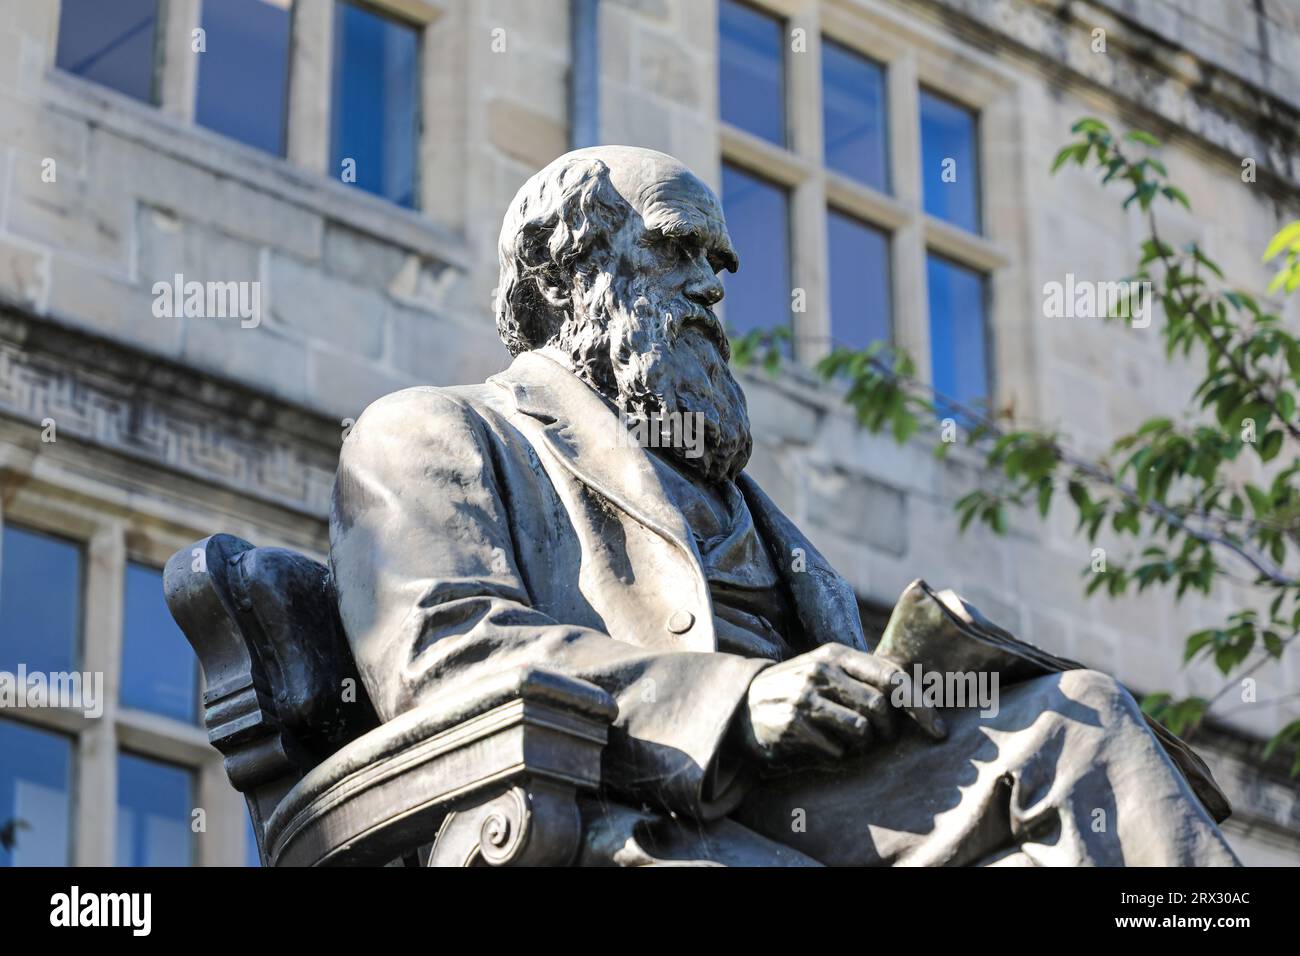 Statue of Charles Darwin in front of Shrewsbury Library, formerly Shrewsbury School, Shrewsbury, Shropshire, England, UK Stock Photo